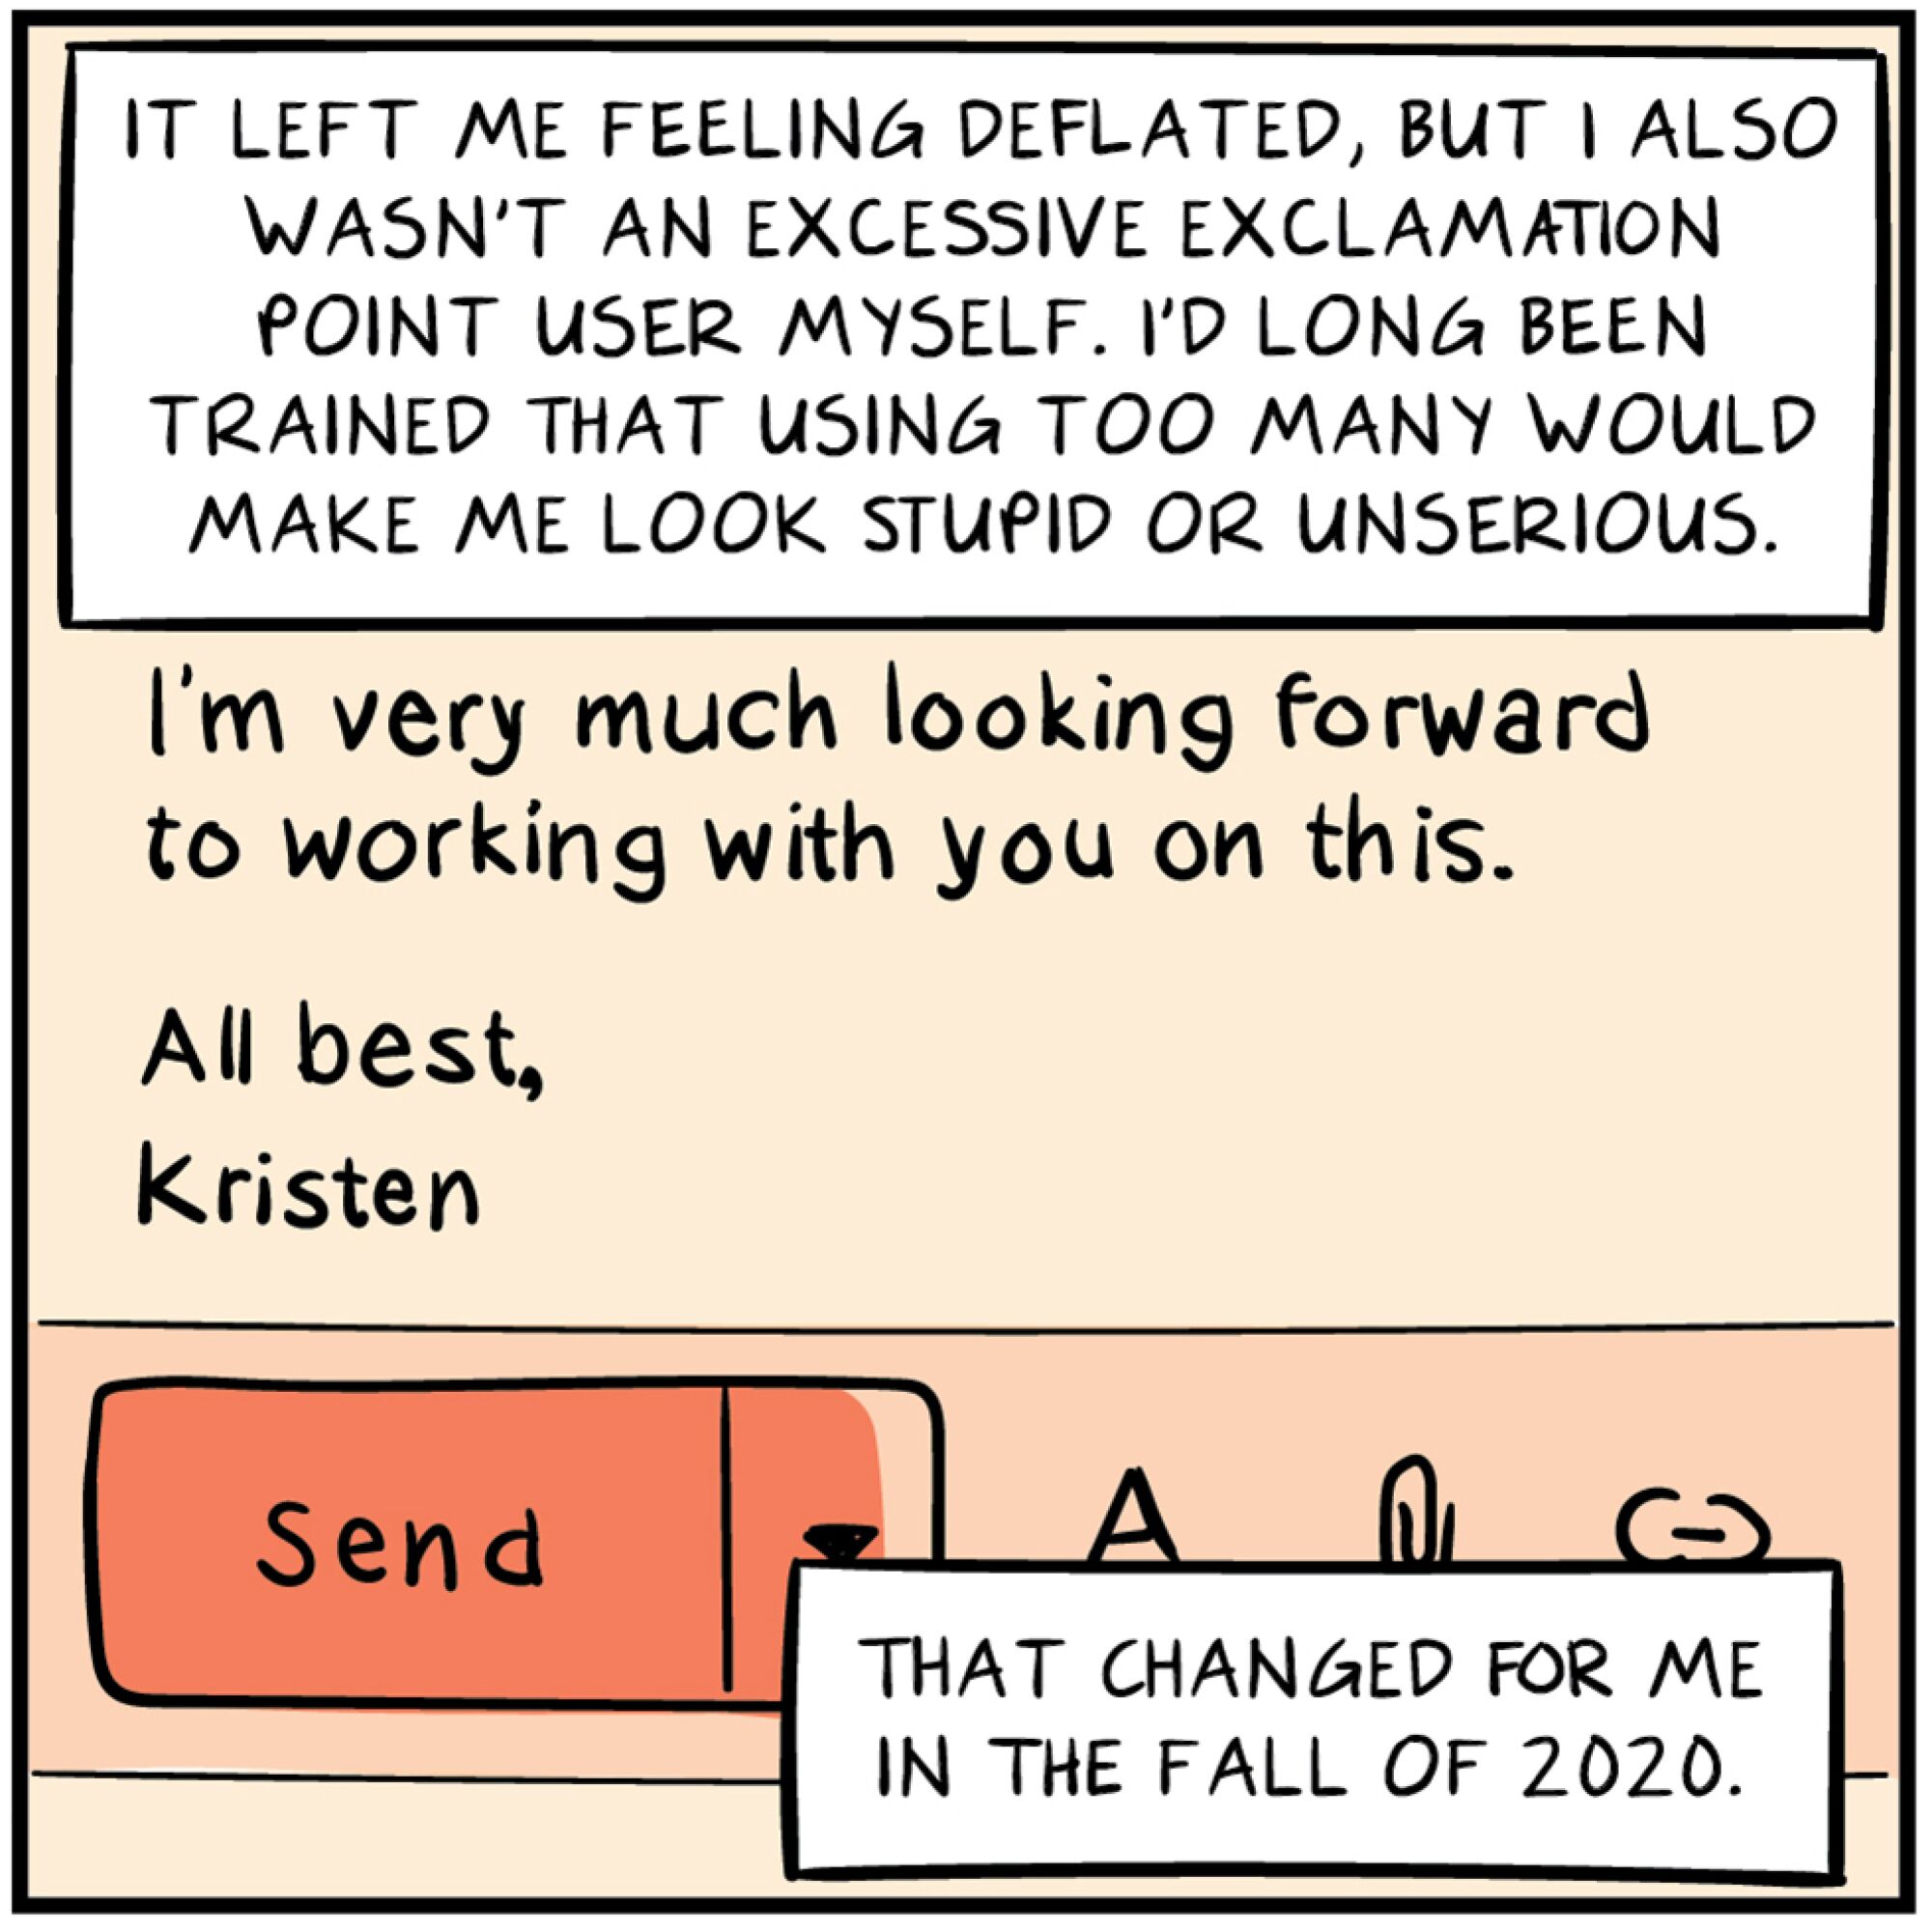 Comic panel of an email with the "send" button prominent at the bottom